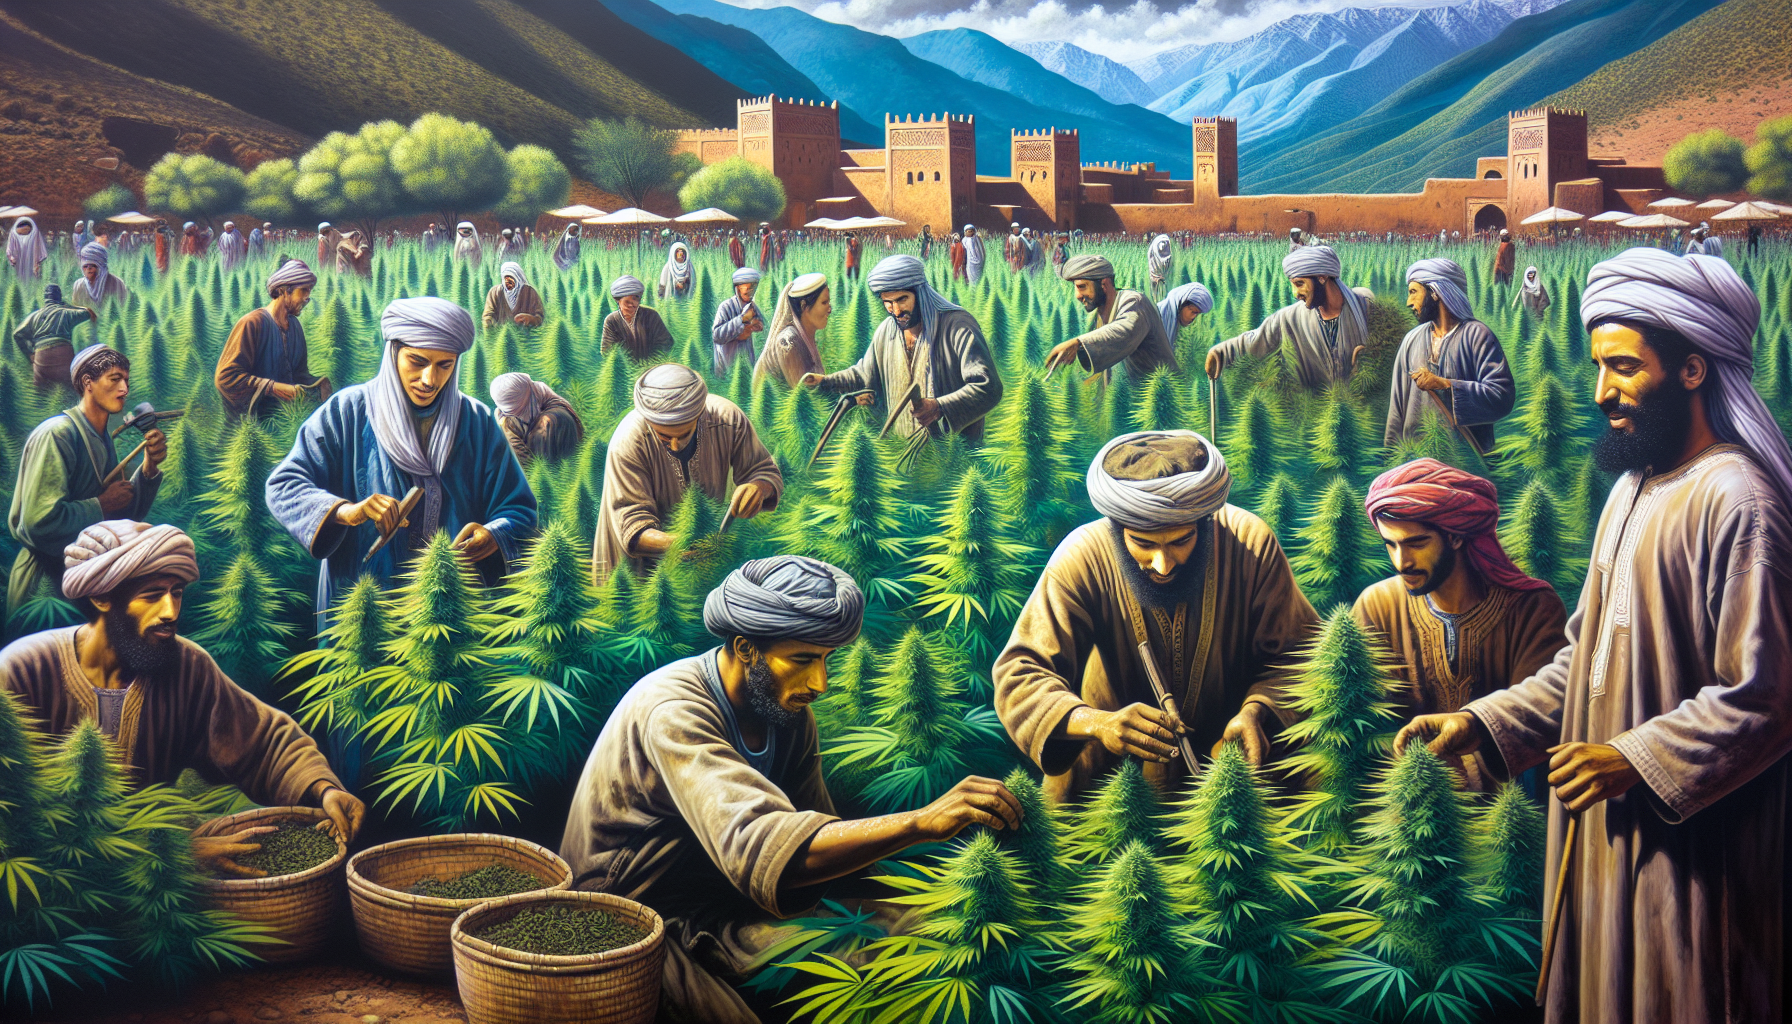 Historical depiction of cannabis cultivation in Morocco